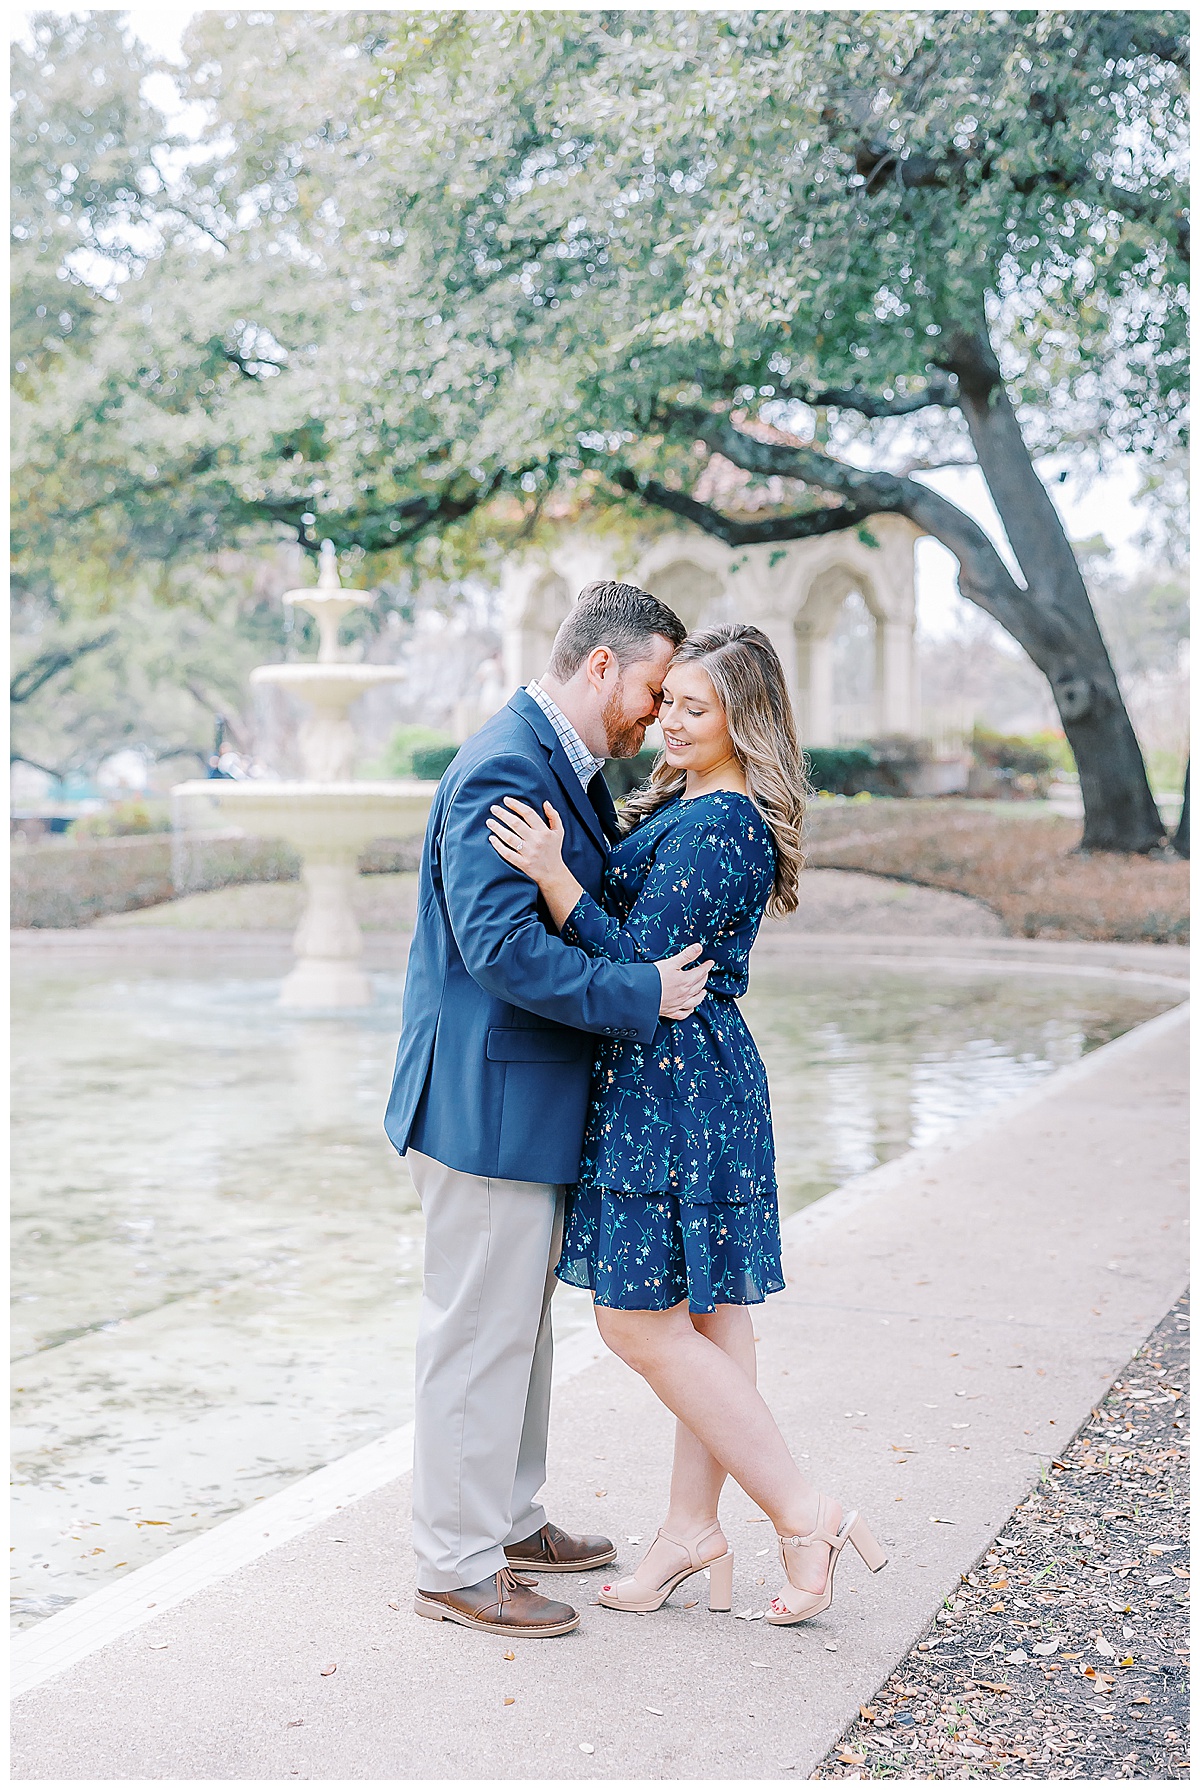 flippen park engagement, flippen park engagement session, dallas engagement session, dallas engagement photographer, dallas wedding photographer, brides of north texas, engagement photos, downtown dallas engagement session, downtown dallas engagement